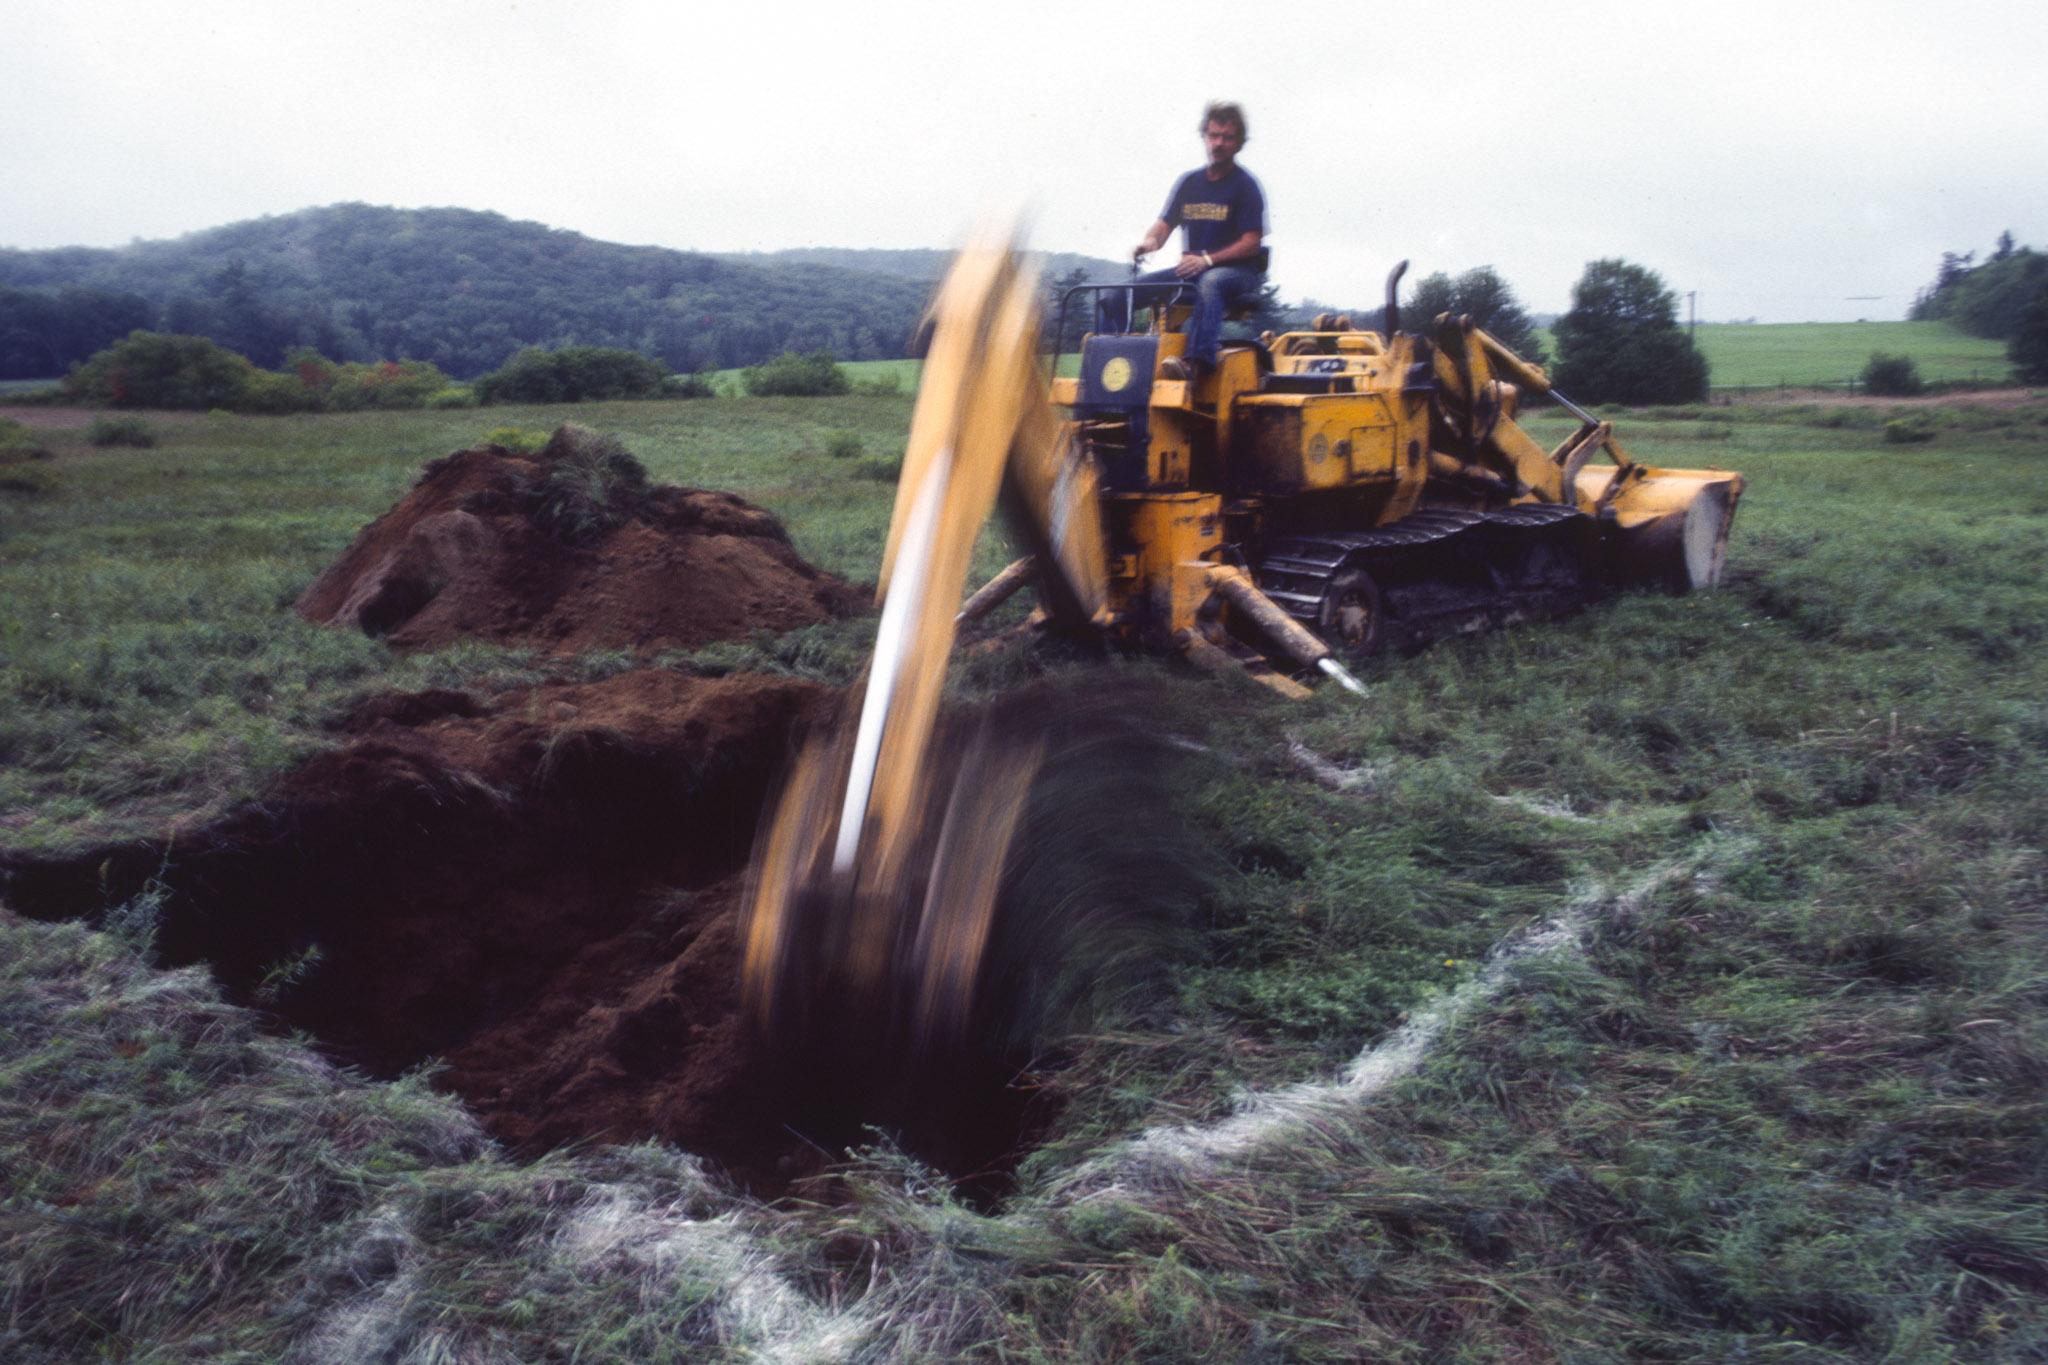 a large digging machine digs a square hole in a green grassy field